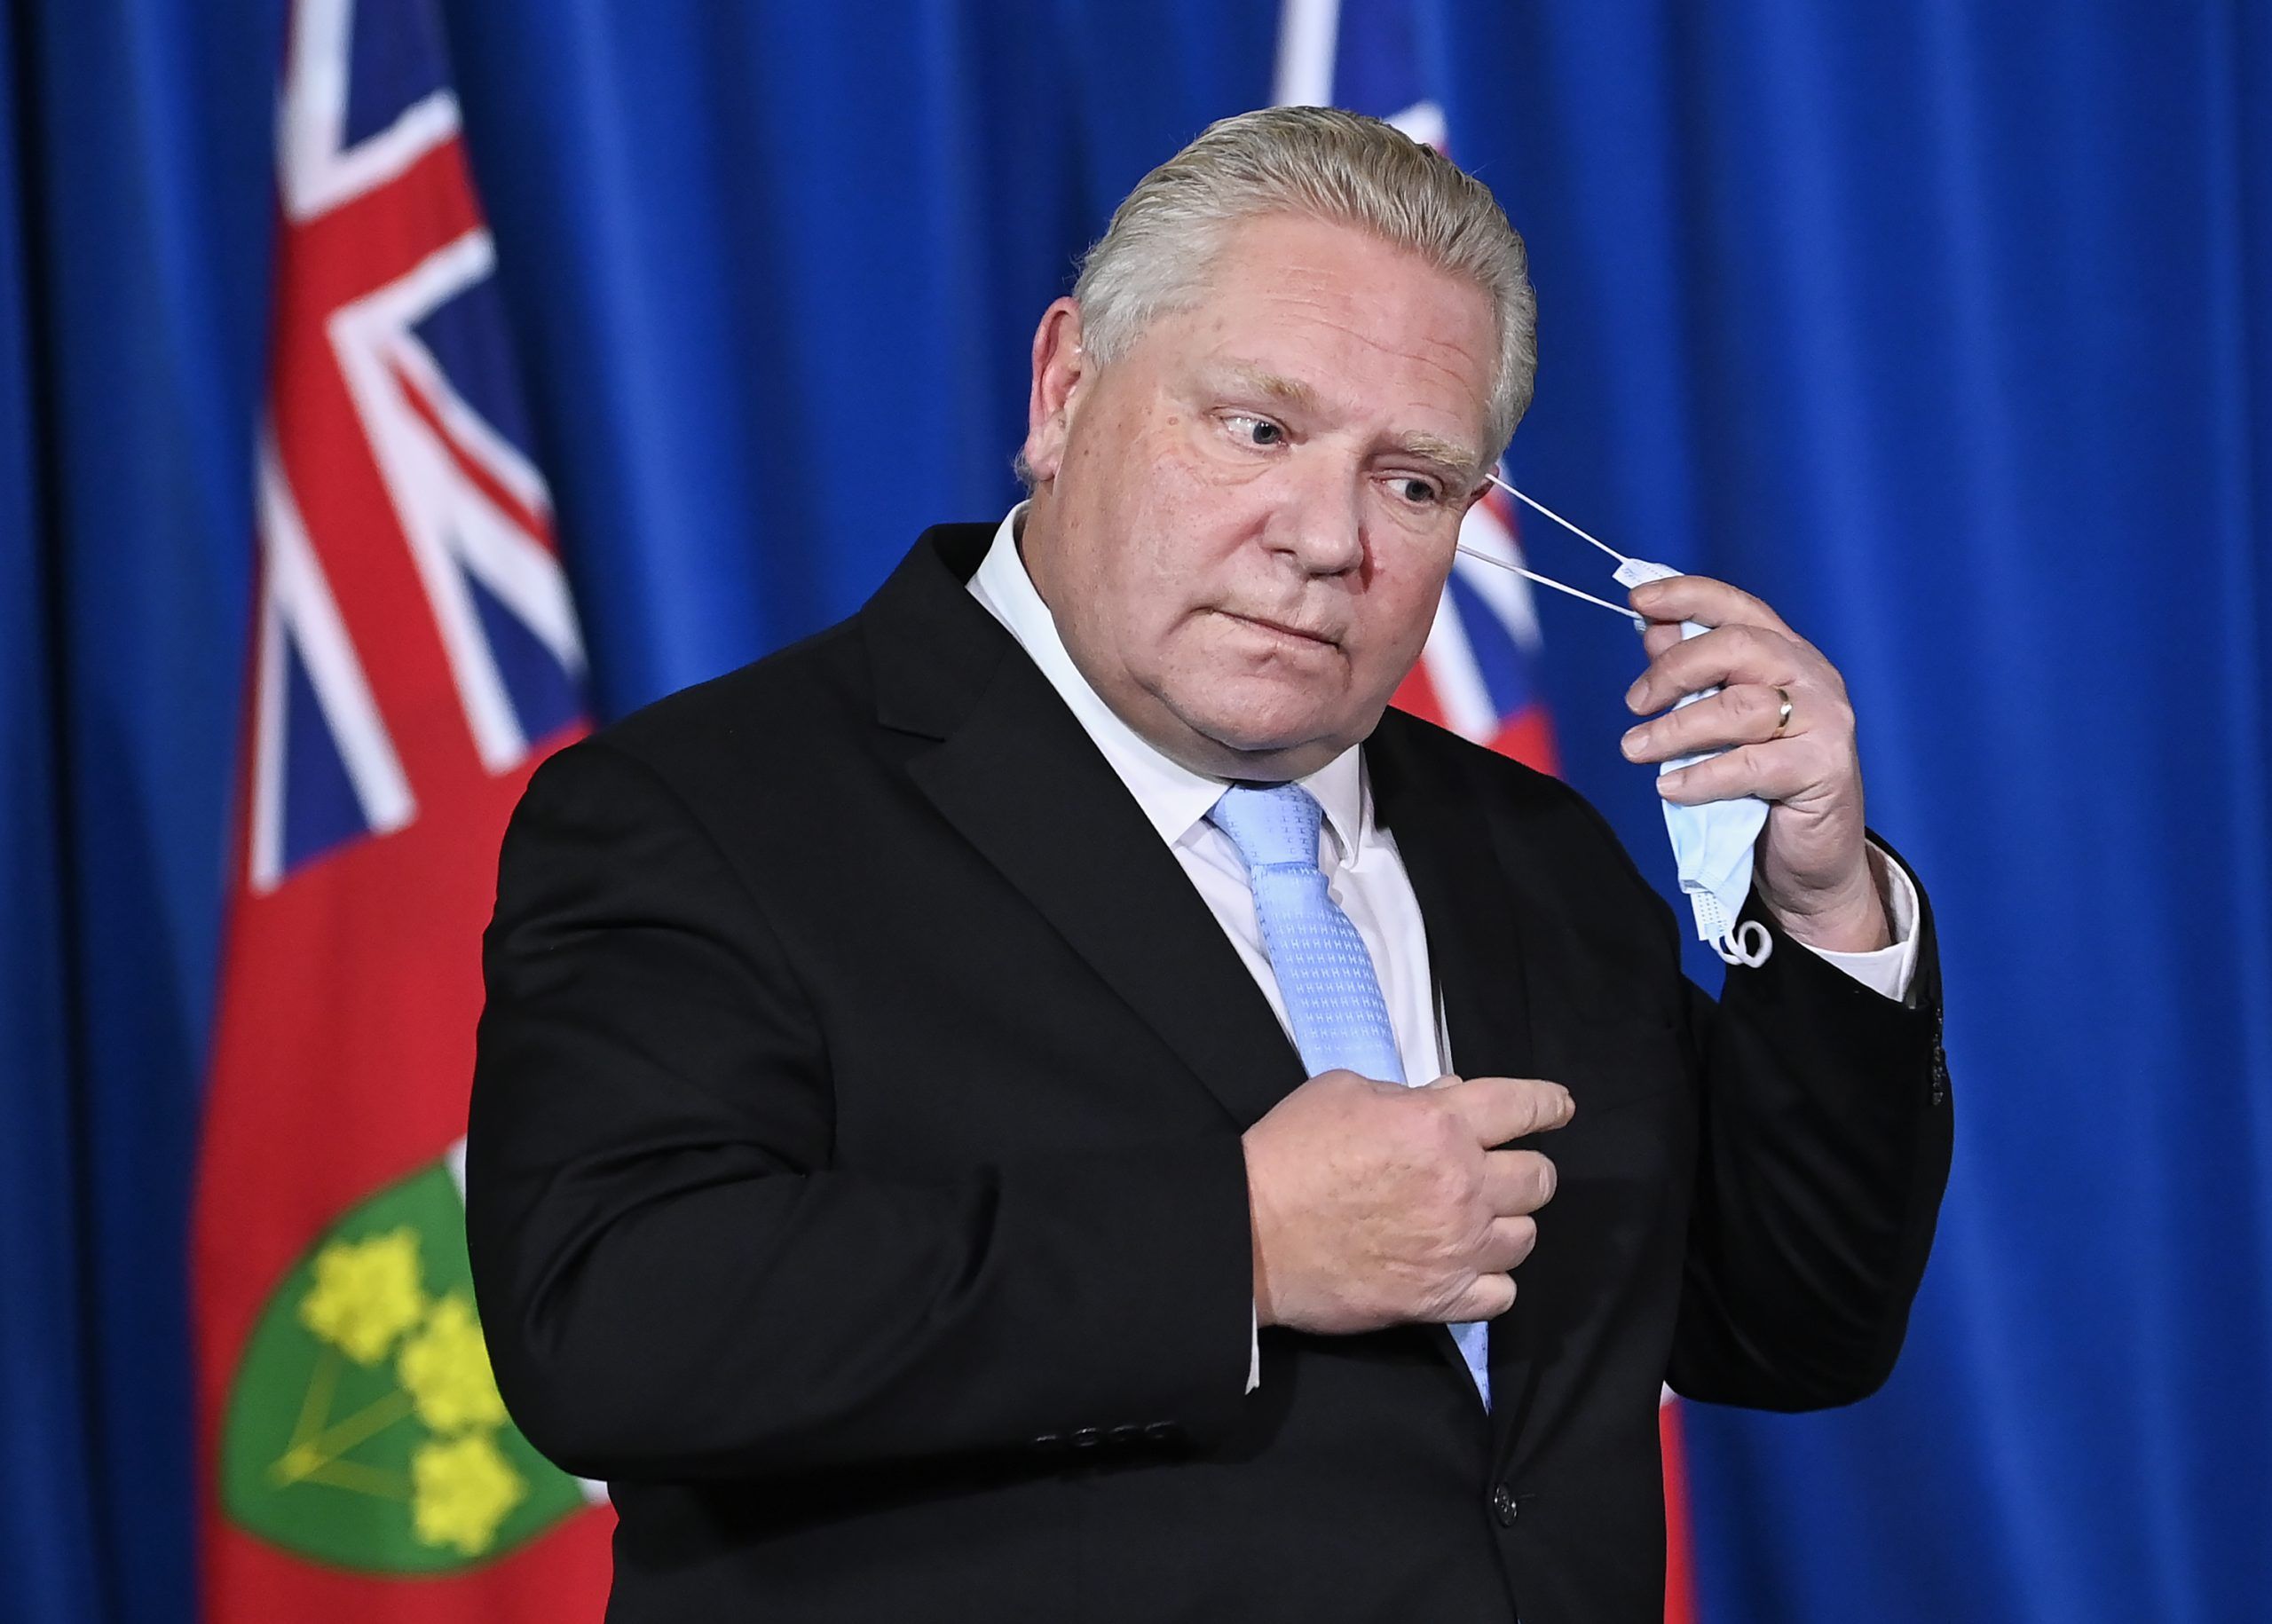 Ontario Premier Doug Ford holds a press conference at Queen's Park during the COVID-19 pandemic in Toronto on Monday, December 21, 2020. 